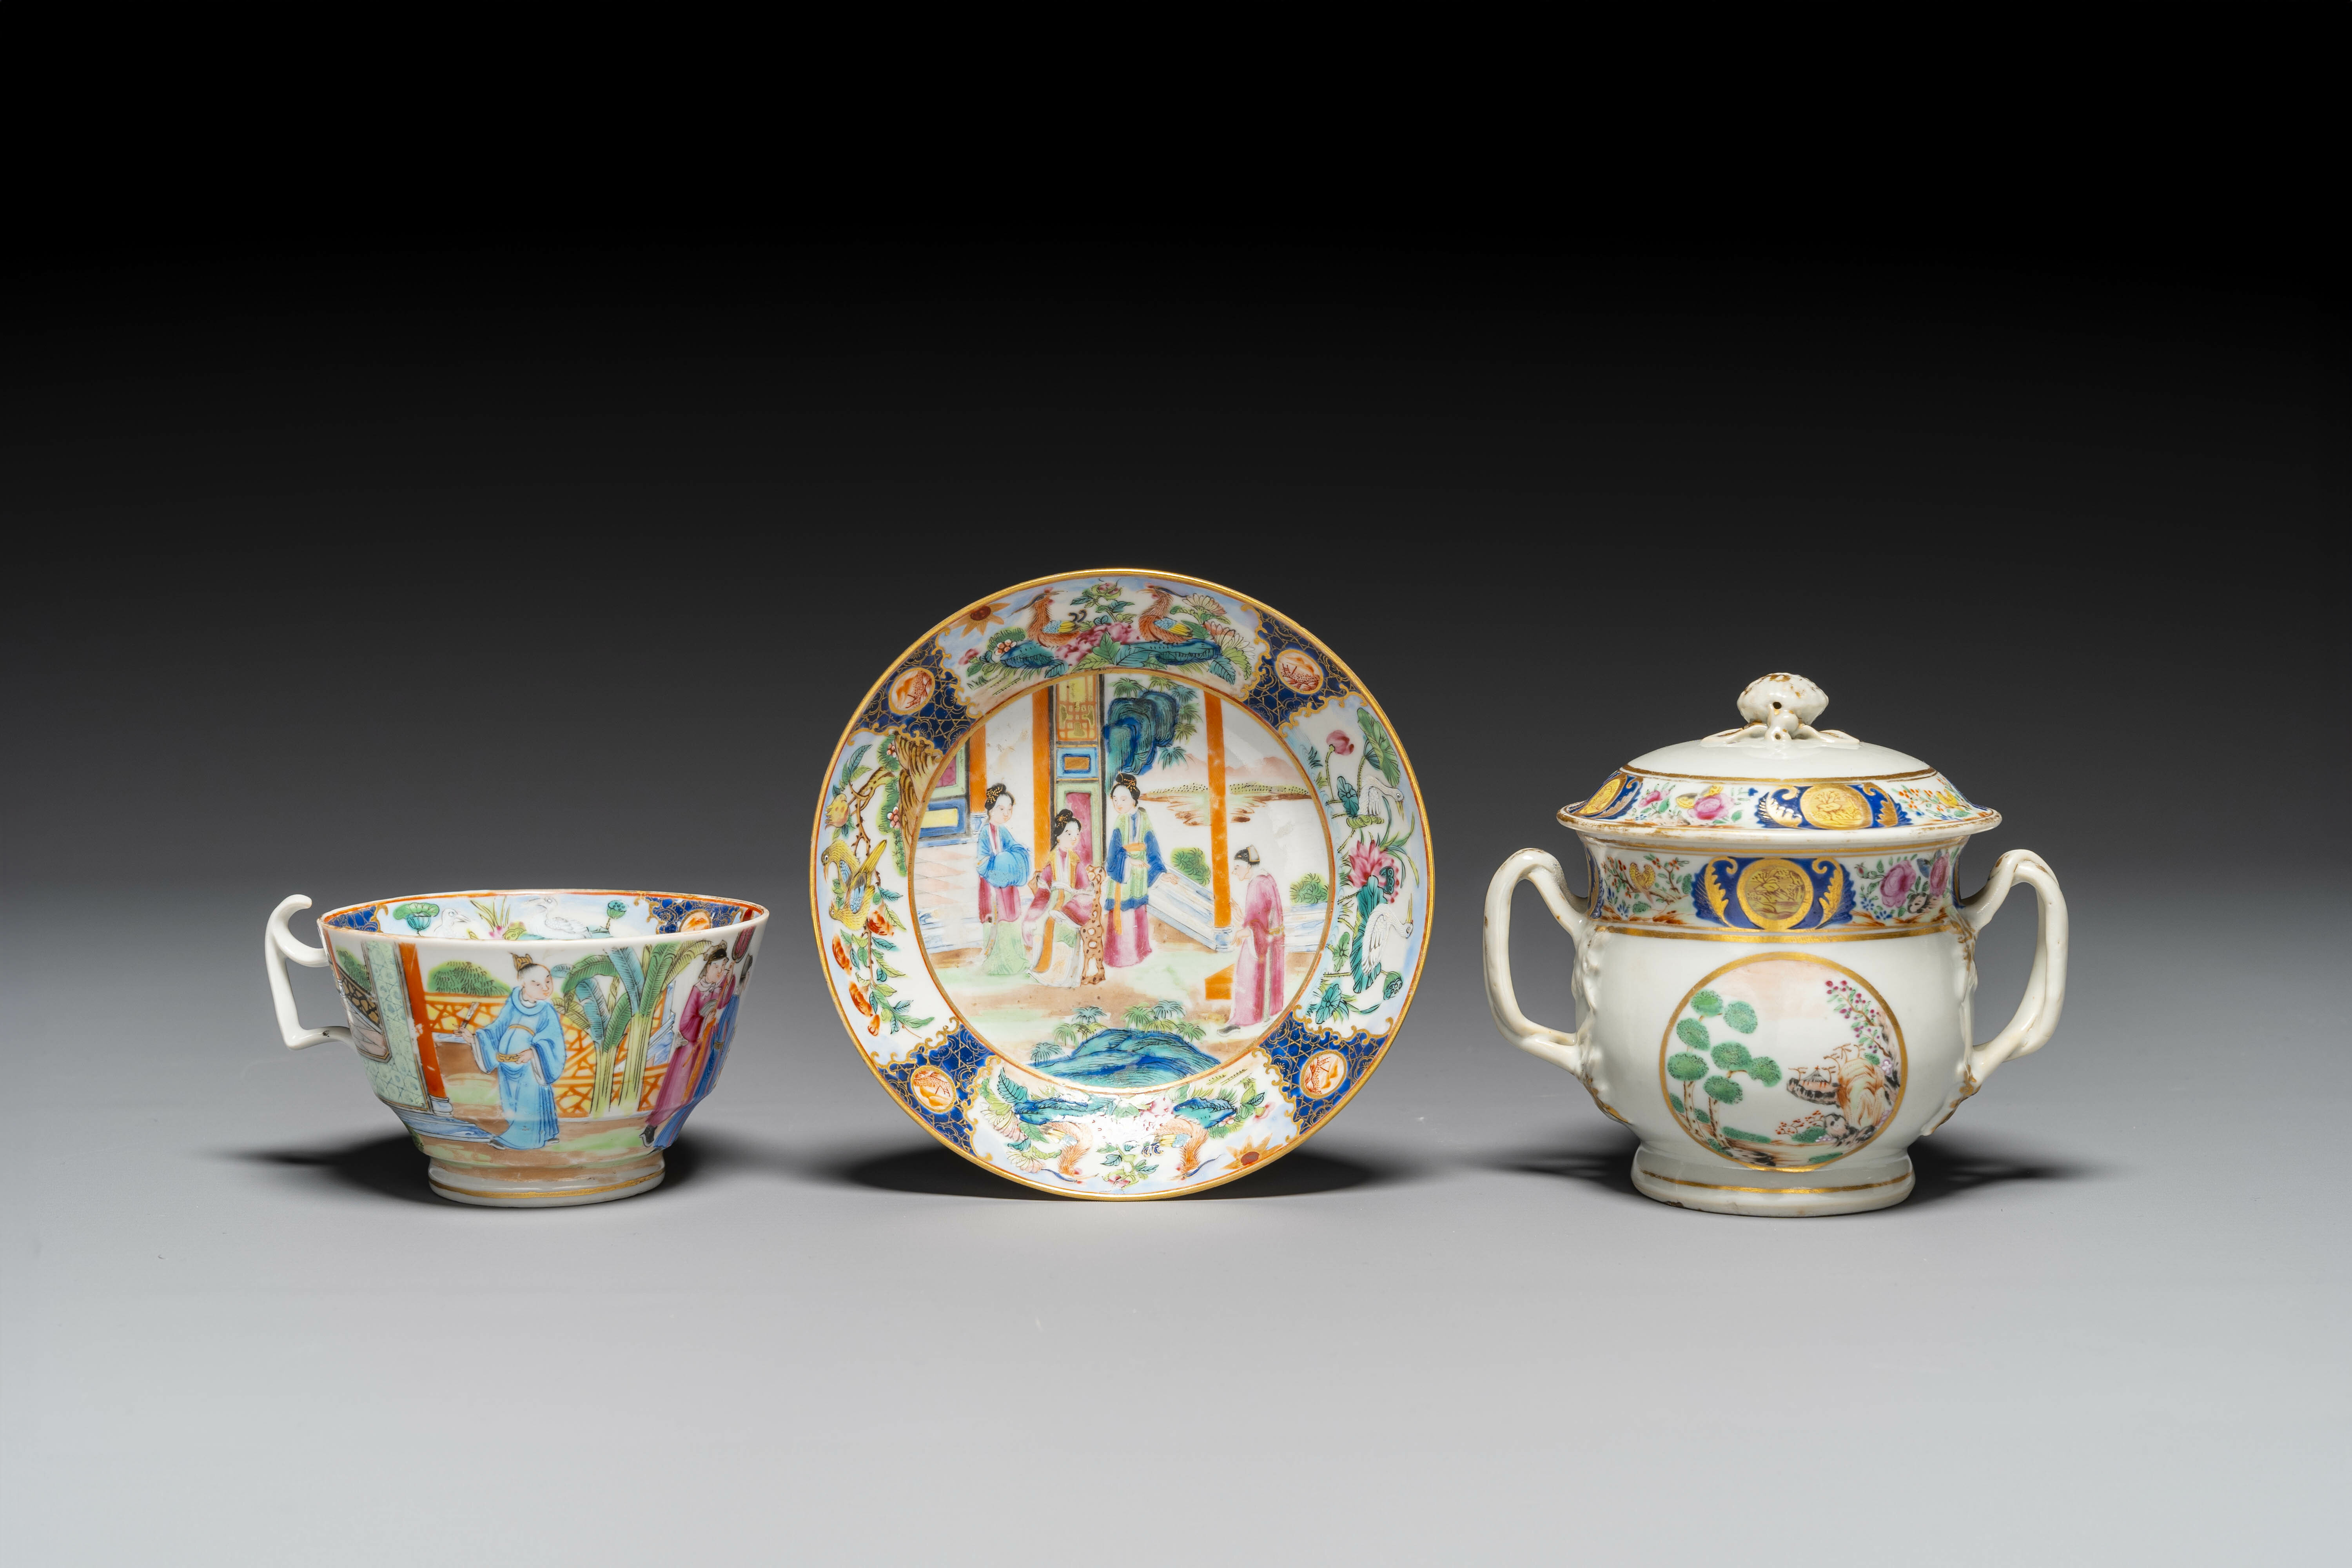 A rare Chinese Canton famille rose covered sugar bowl, a cup and saucer, 19th C.